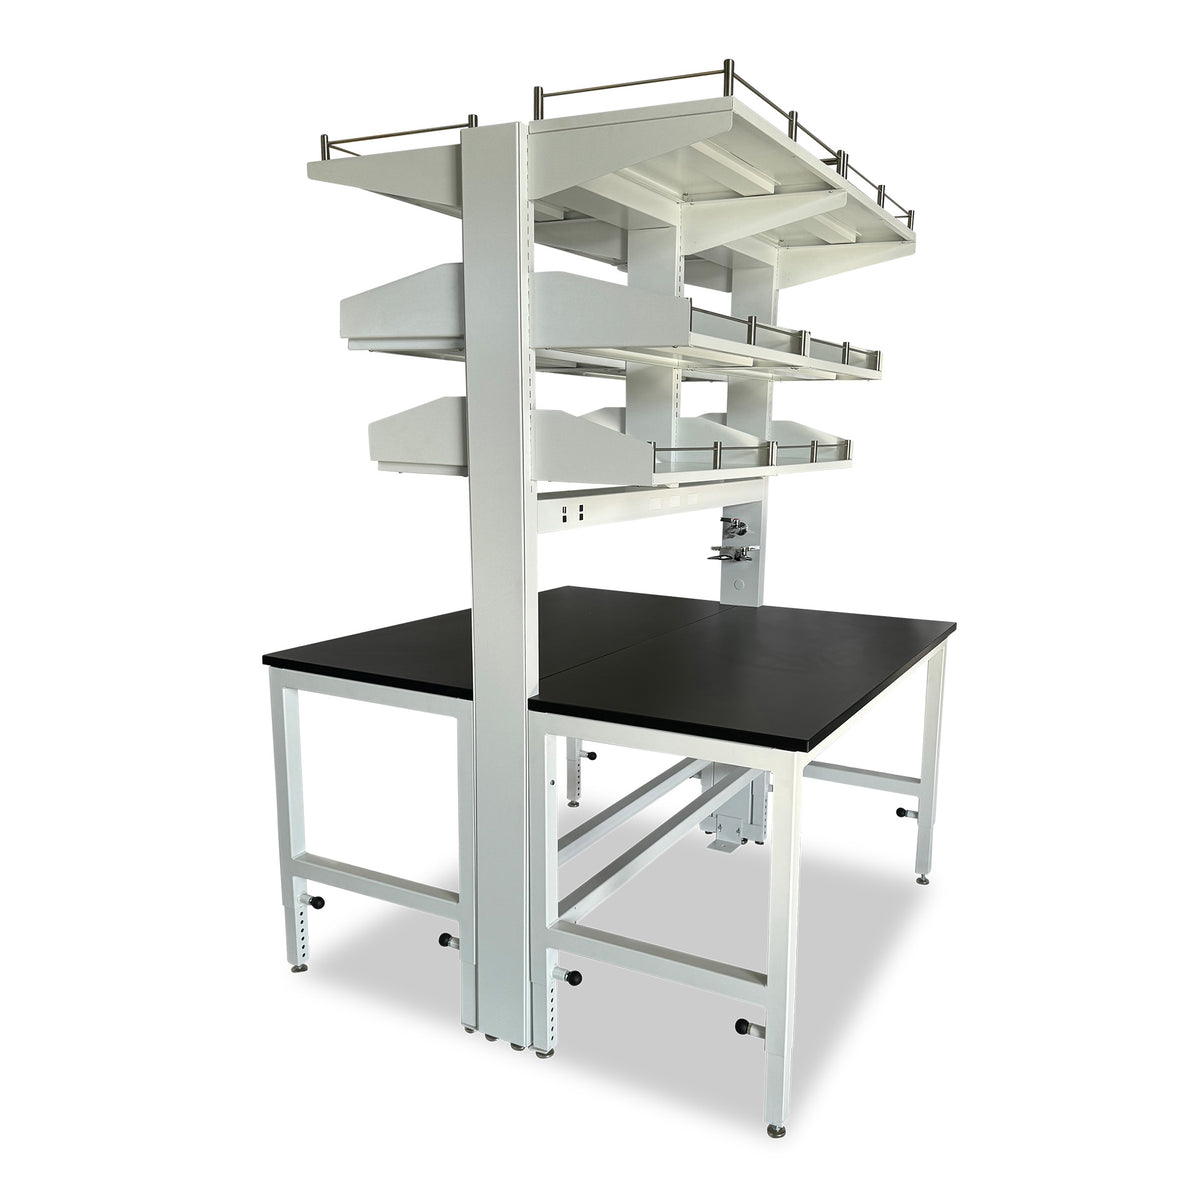 Avatar Lab Bench System - 03 - Double